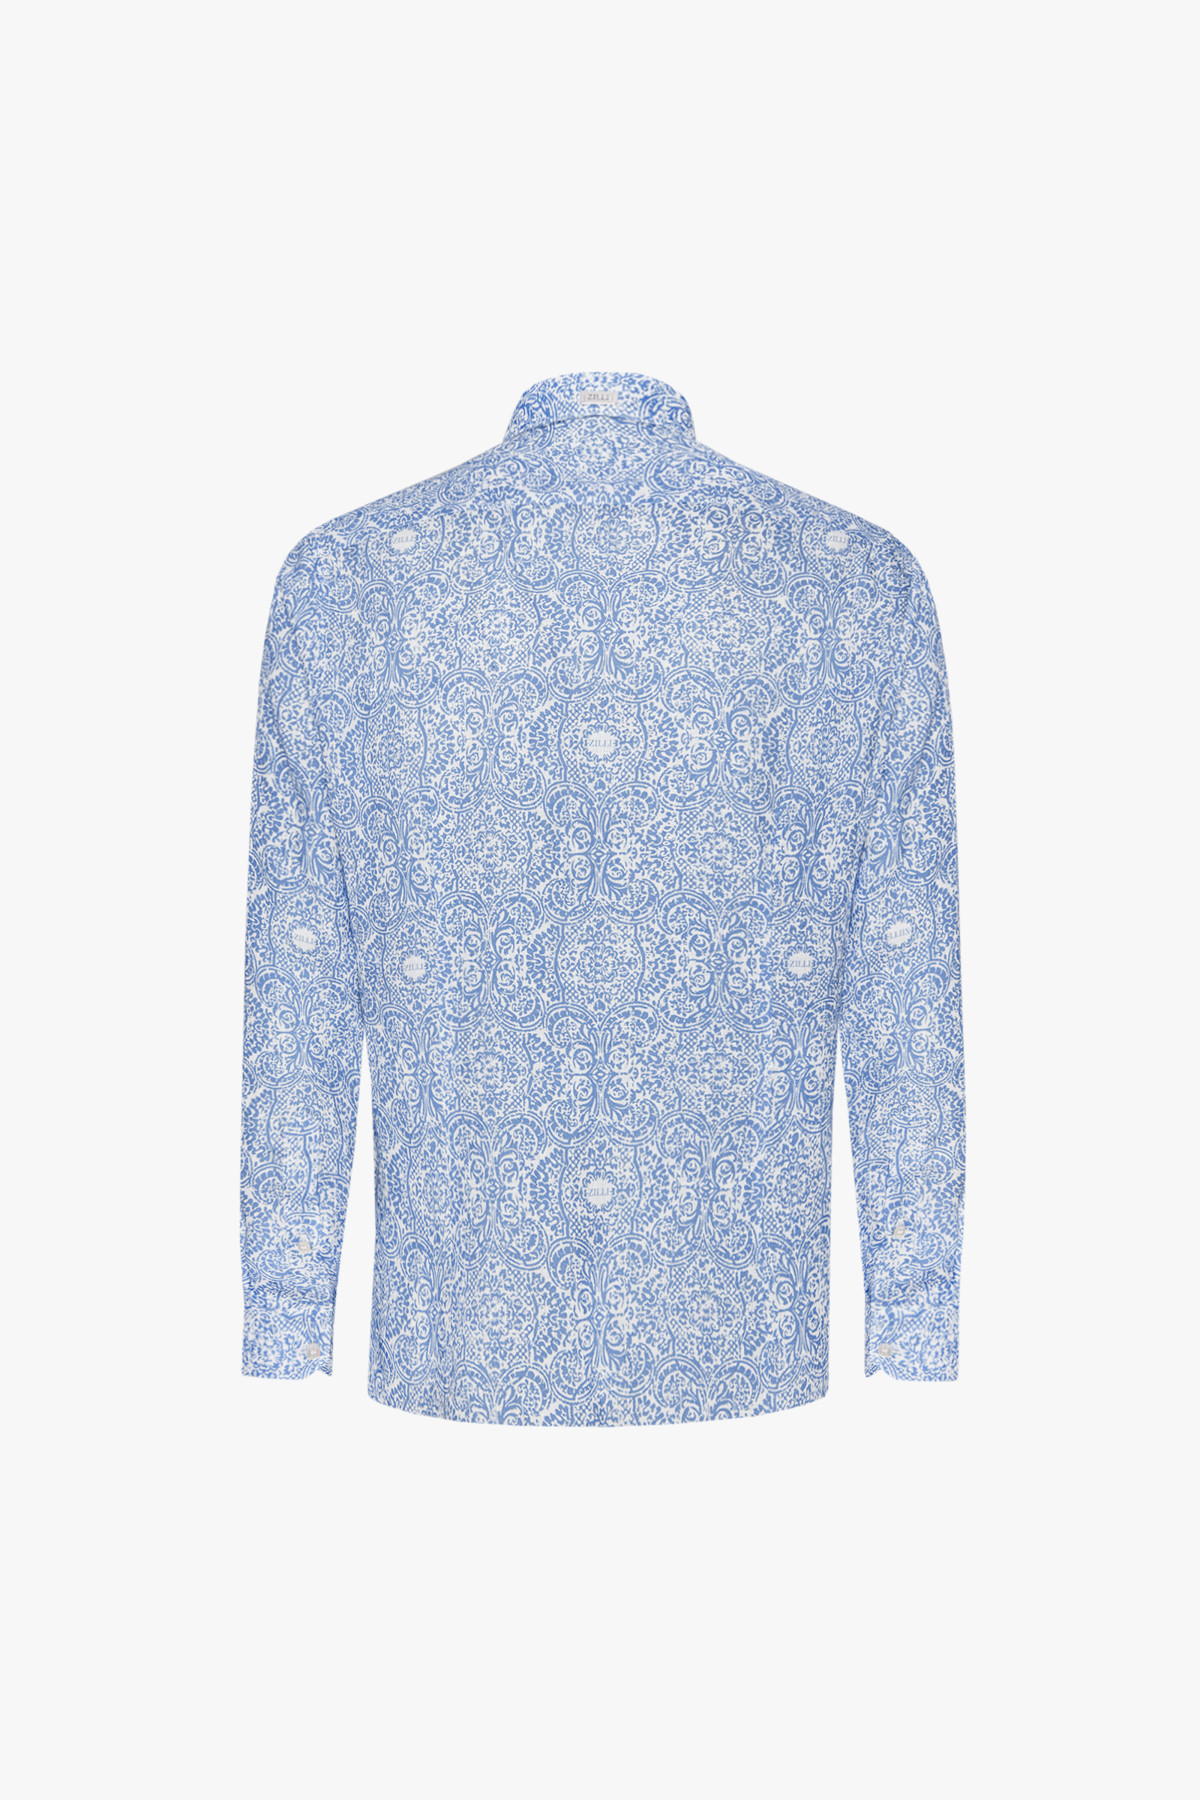 Sky-blue and white shirt, paisley printed pattern